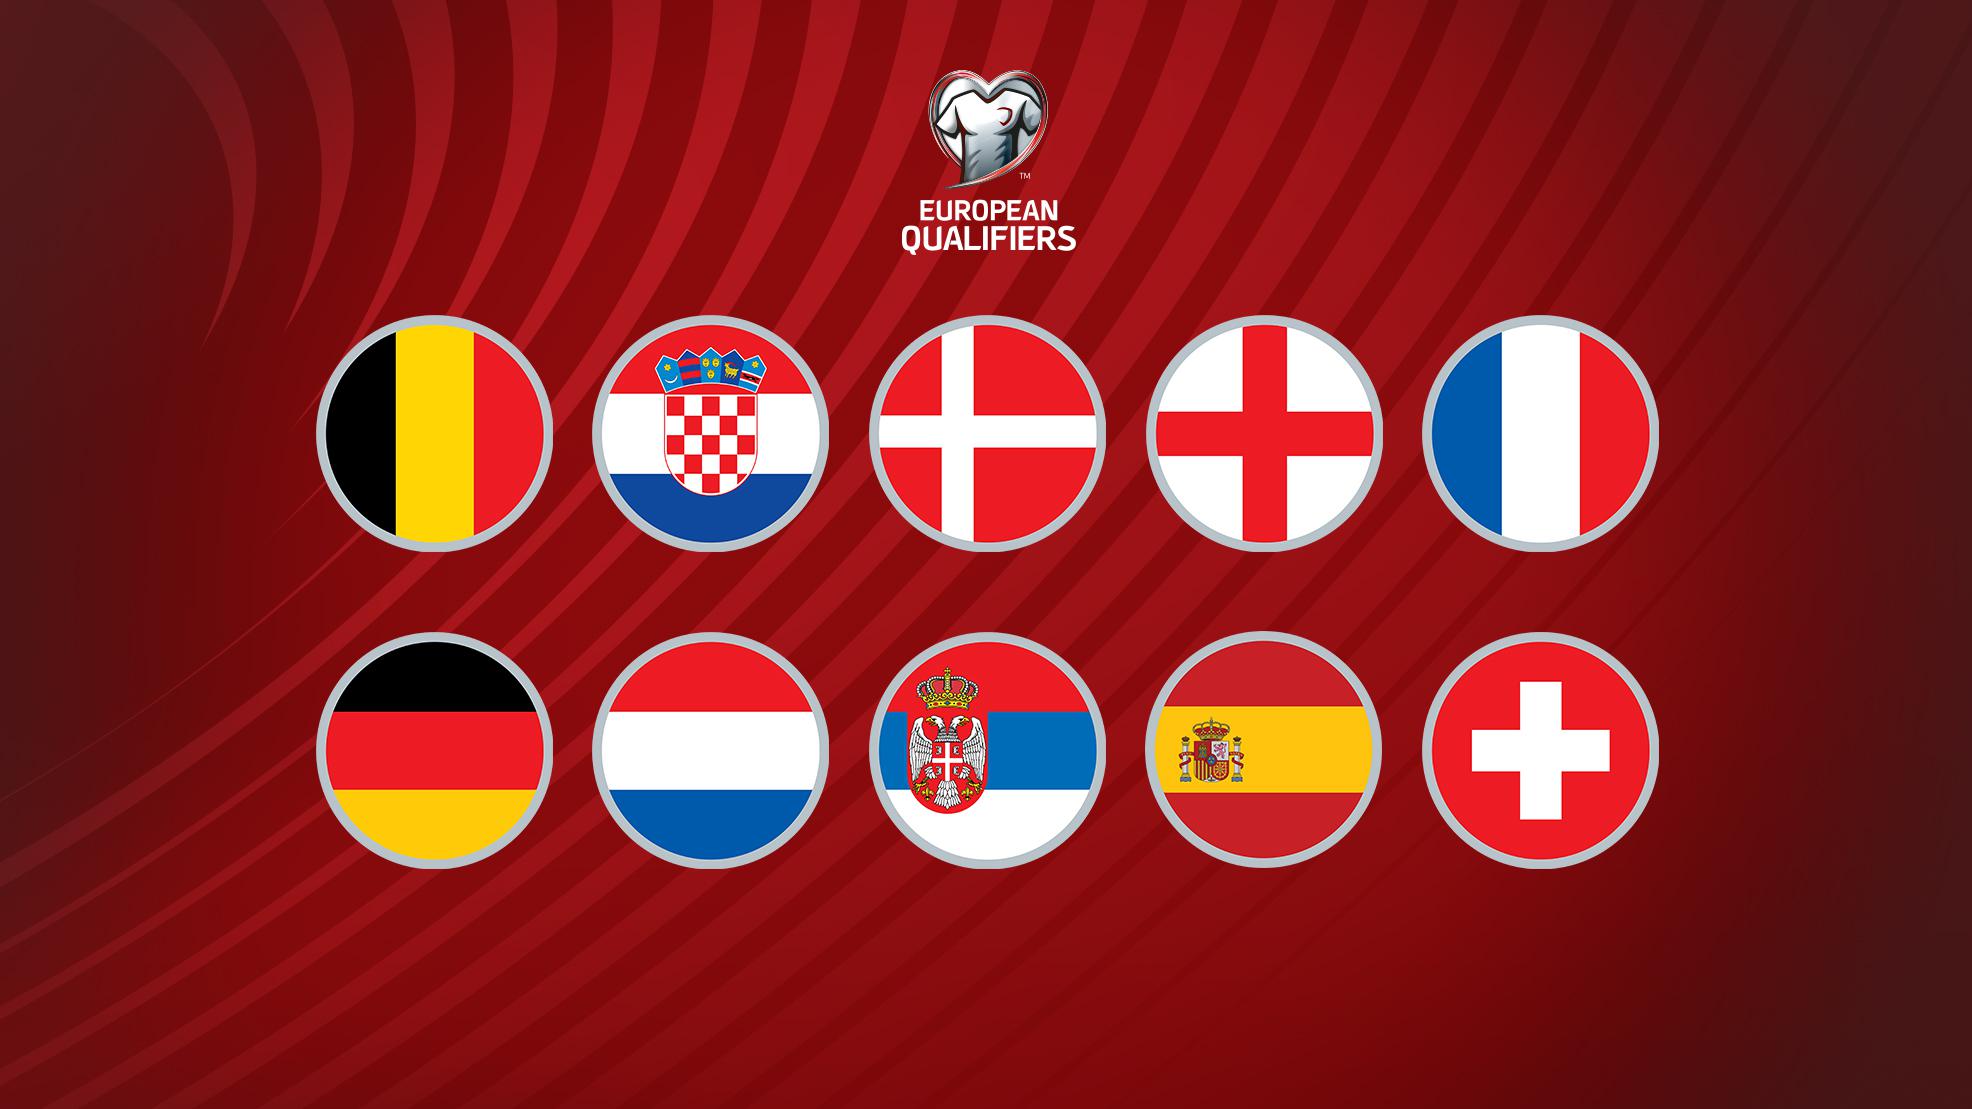 Cup europe world qualifiers 2022 FIFA